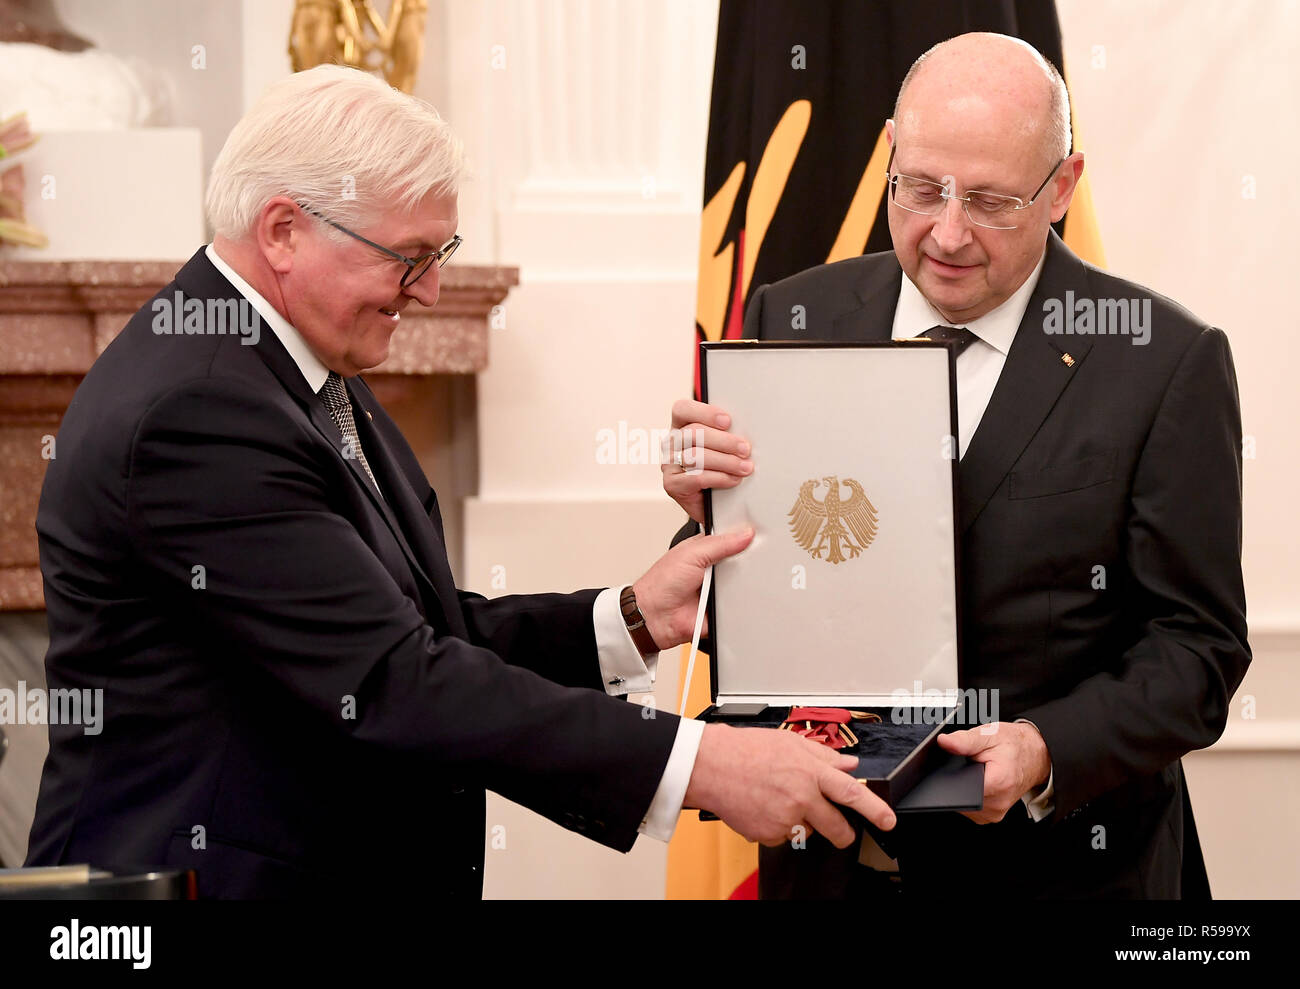 Berlin, Germany. 30th Nov, 2018. Federal President Frank-Walter Steinmeier (l) dismisses Ferdinand Kirchhof from his position as Vice-President of the Federal Constitutional Court and awards him the Grand Cross of Merit. Credit: Britta Pedersen/dpa/Alamy Live News Stock Photo